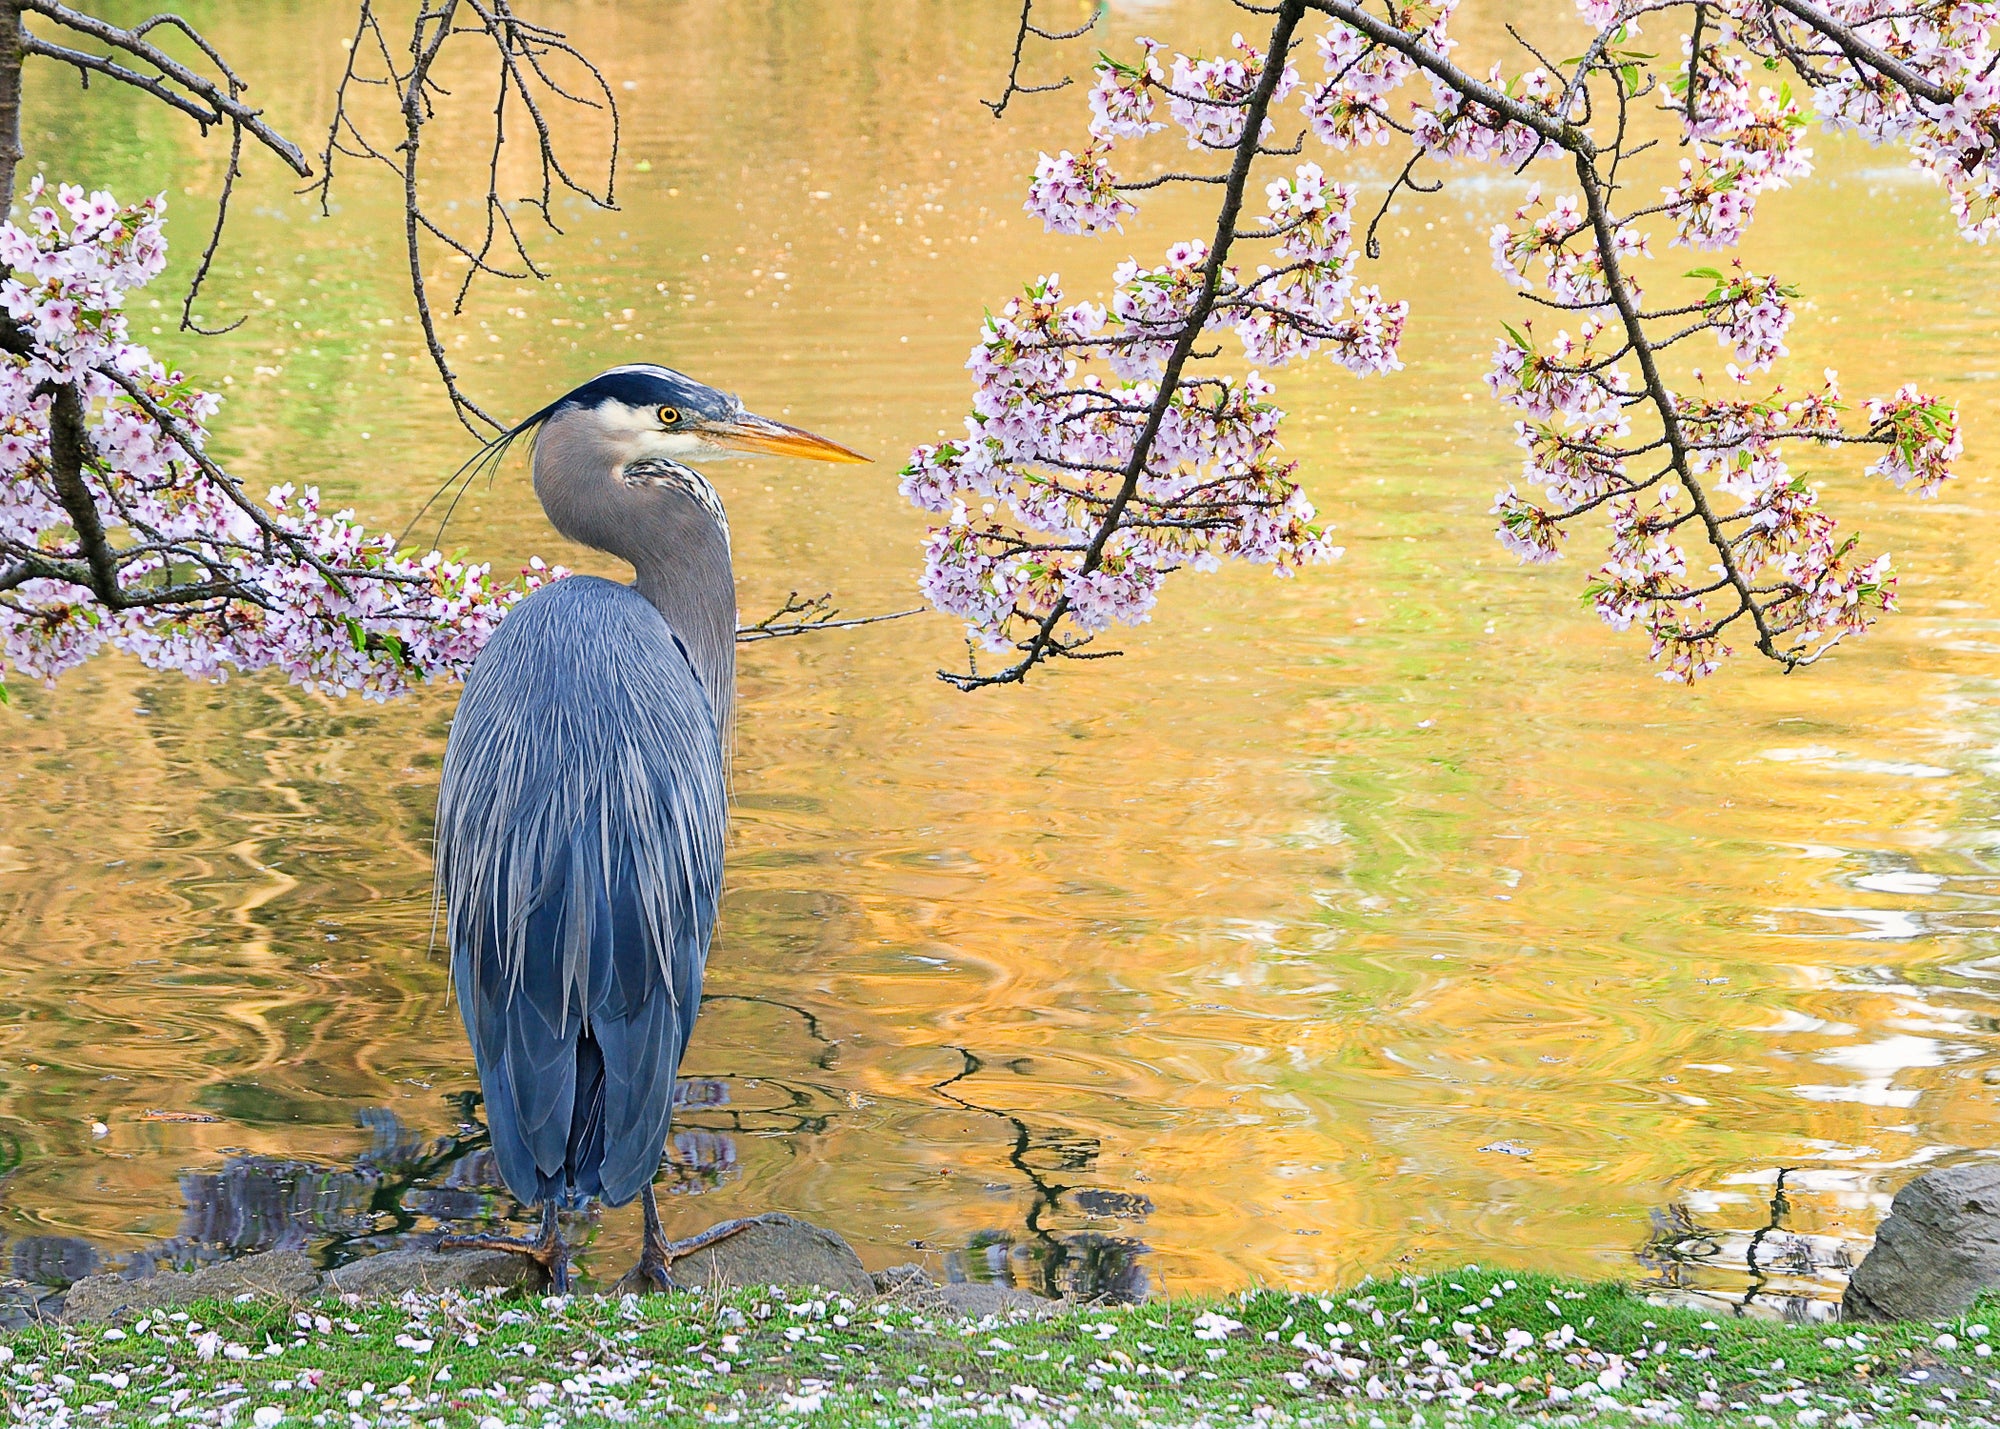 A great blue heron by water's edge with cherry blossoms above. End of image description.